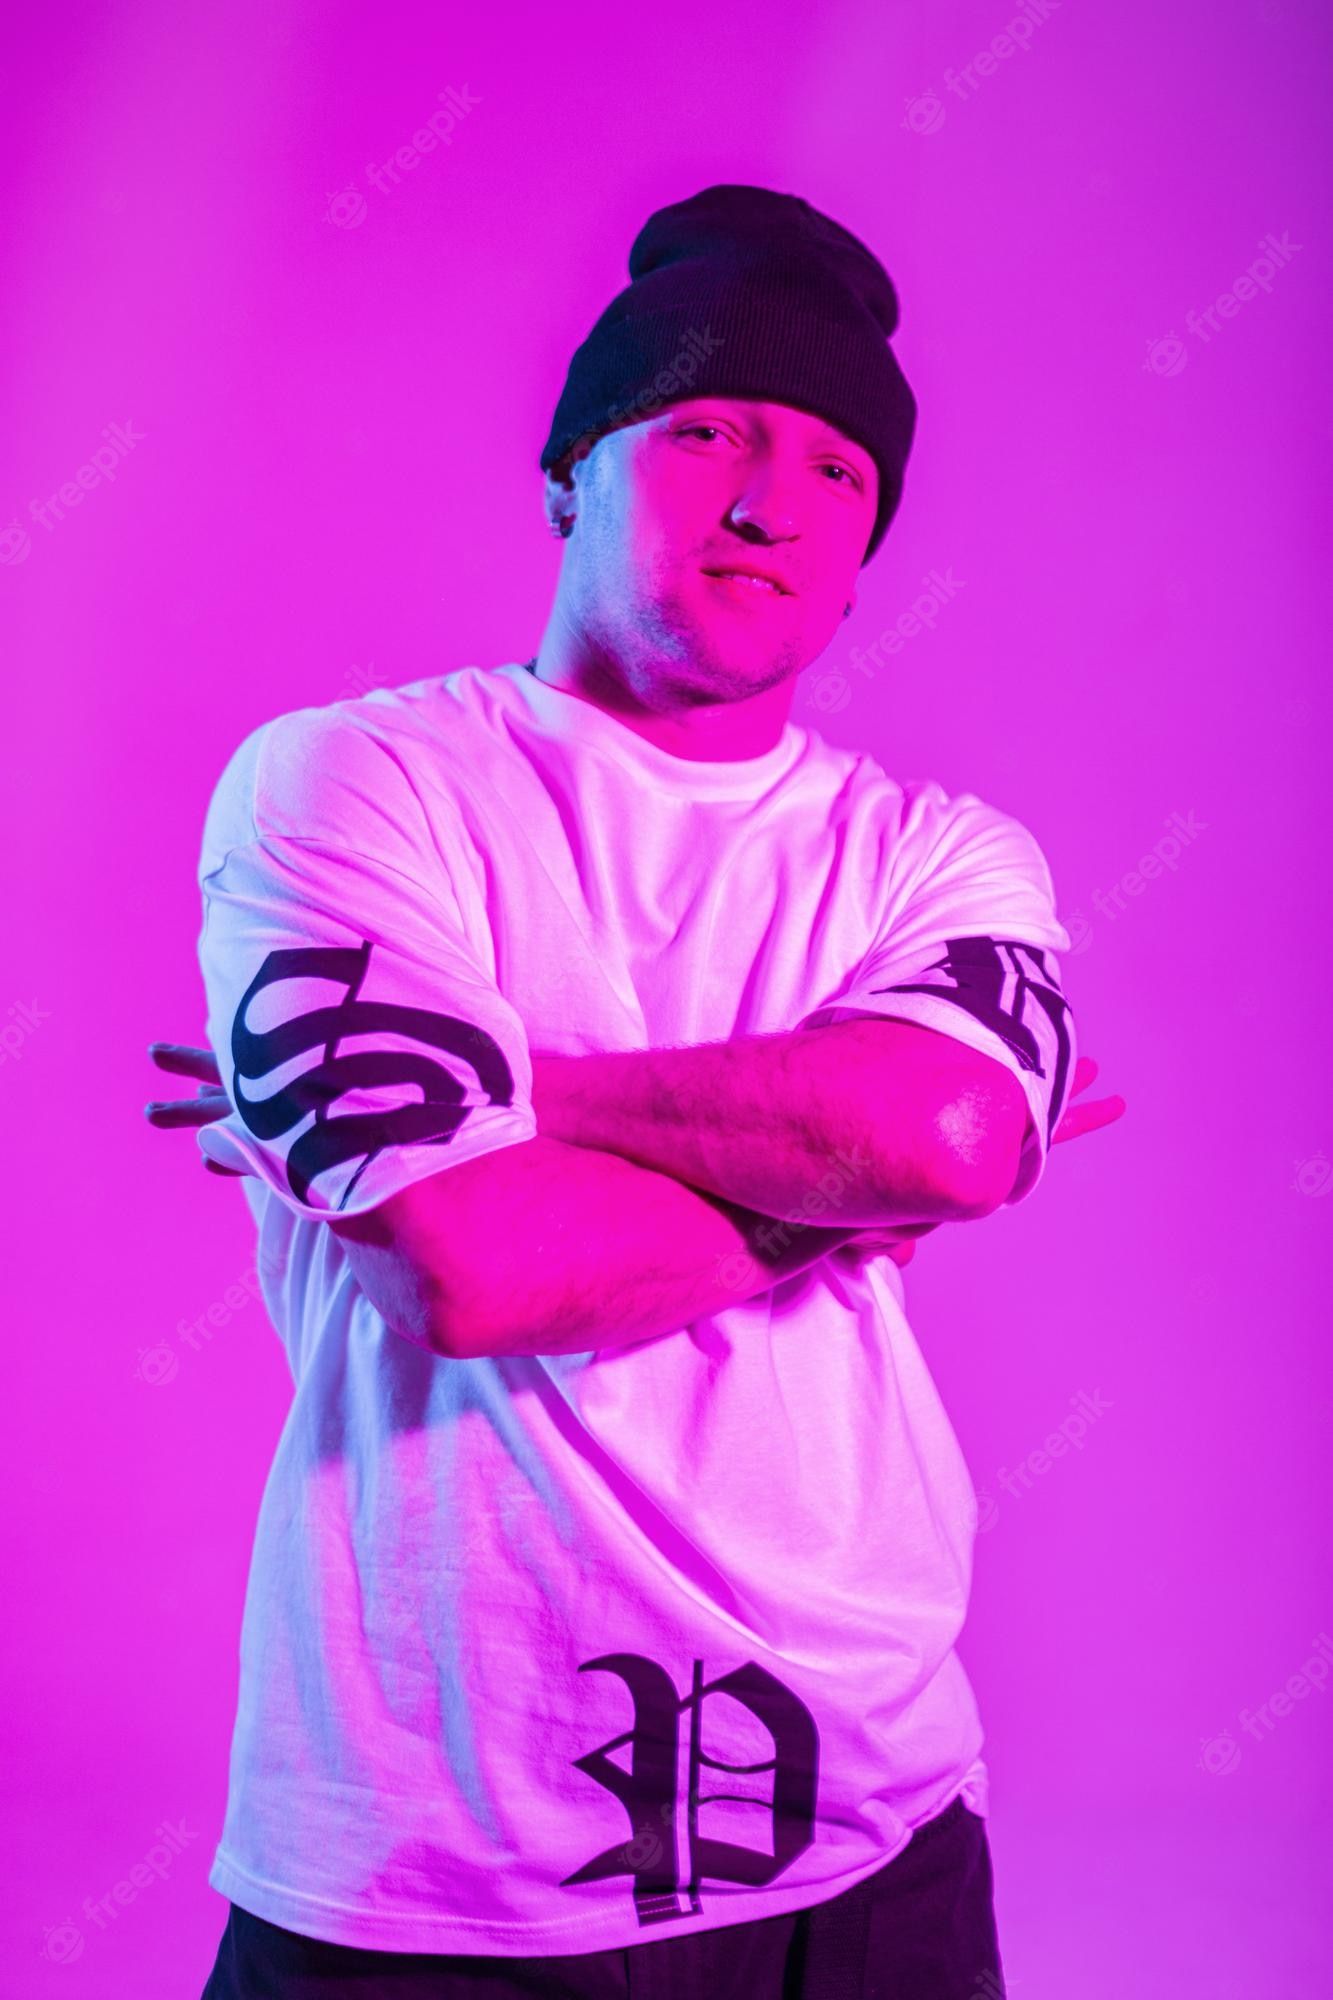 A man in a white t-shirt and black beanie stands with his arms crossed in front of a purple background. - Chance the Rapper